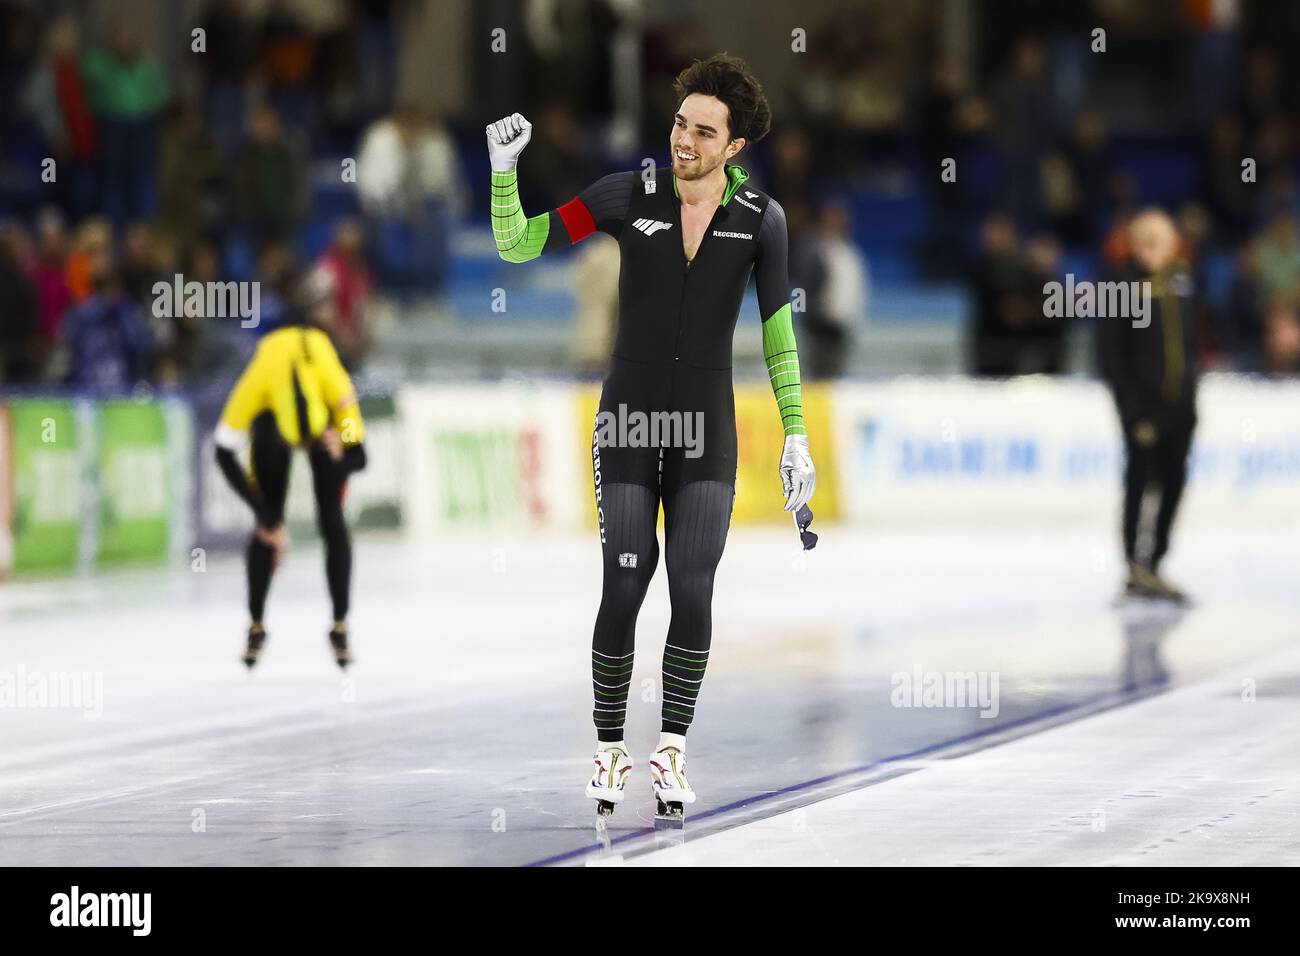 2022-10-30 14:42:52 HeereNVEEN - Patrick Roest reacts after the 10,000 meters during the World Cup Qualifying Tournament in Thialf. ANP VINCENT JANNINK netherlands out - belgium out Stock Photo